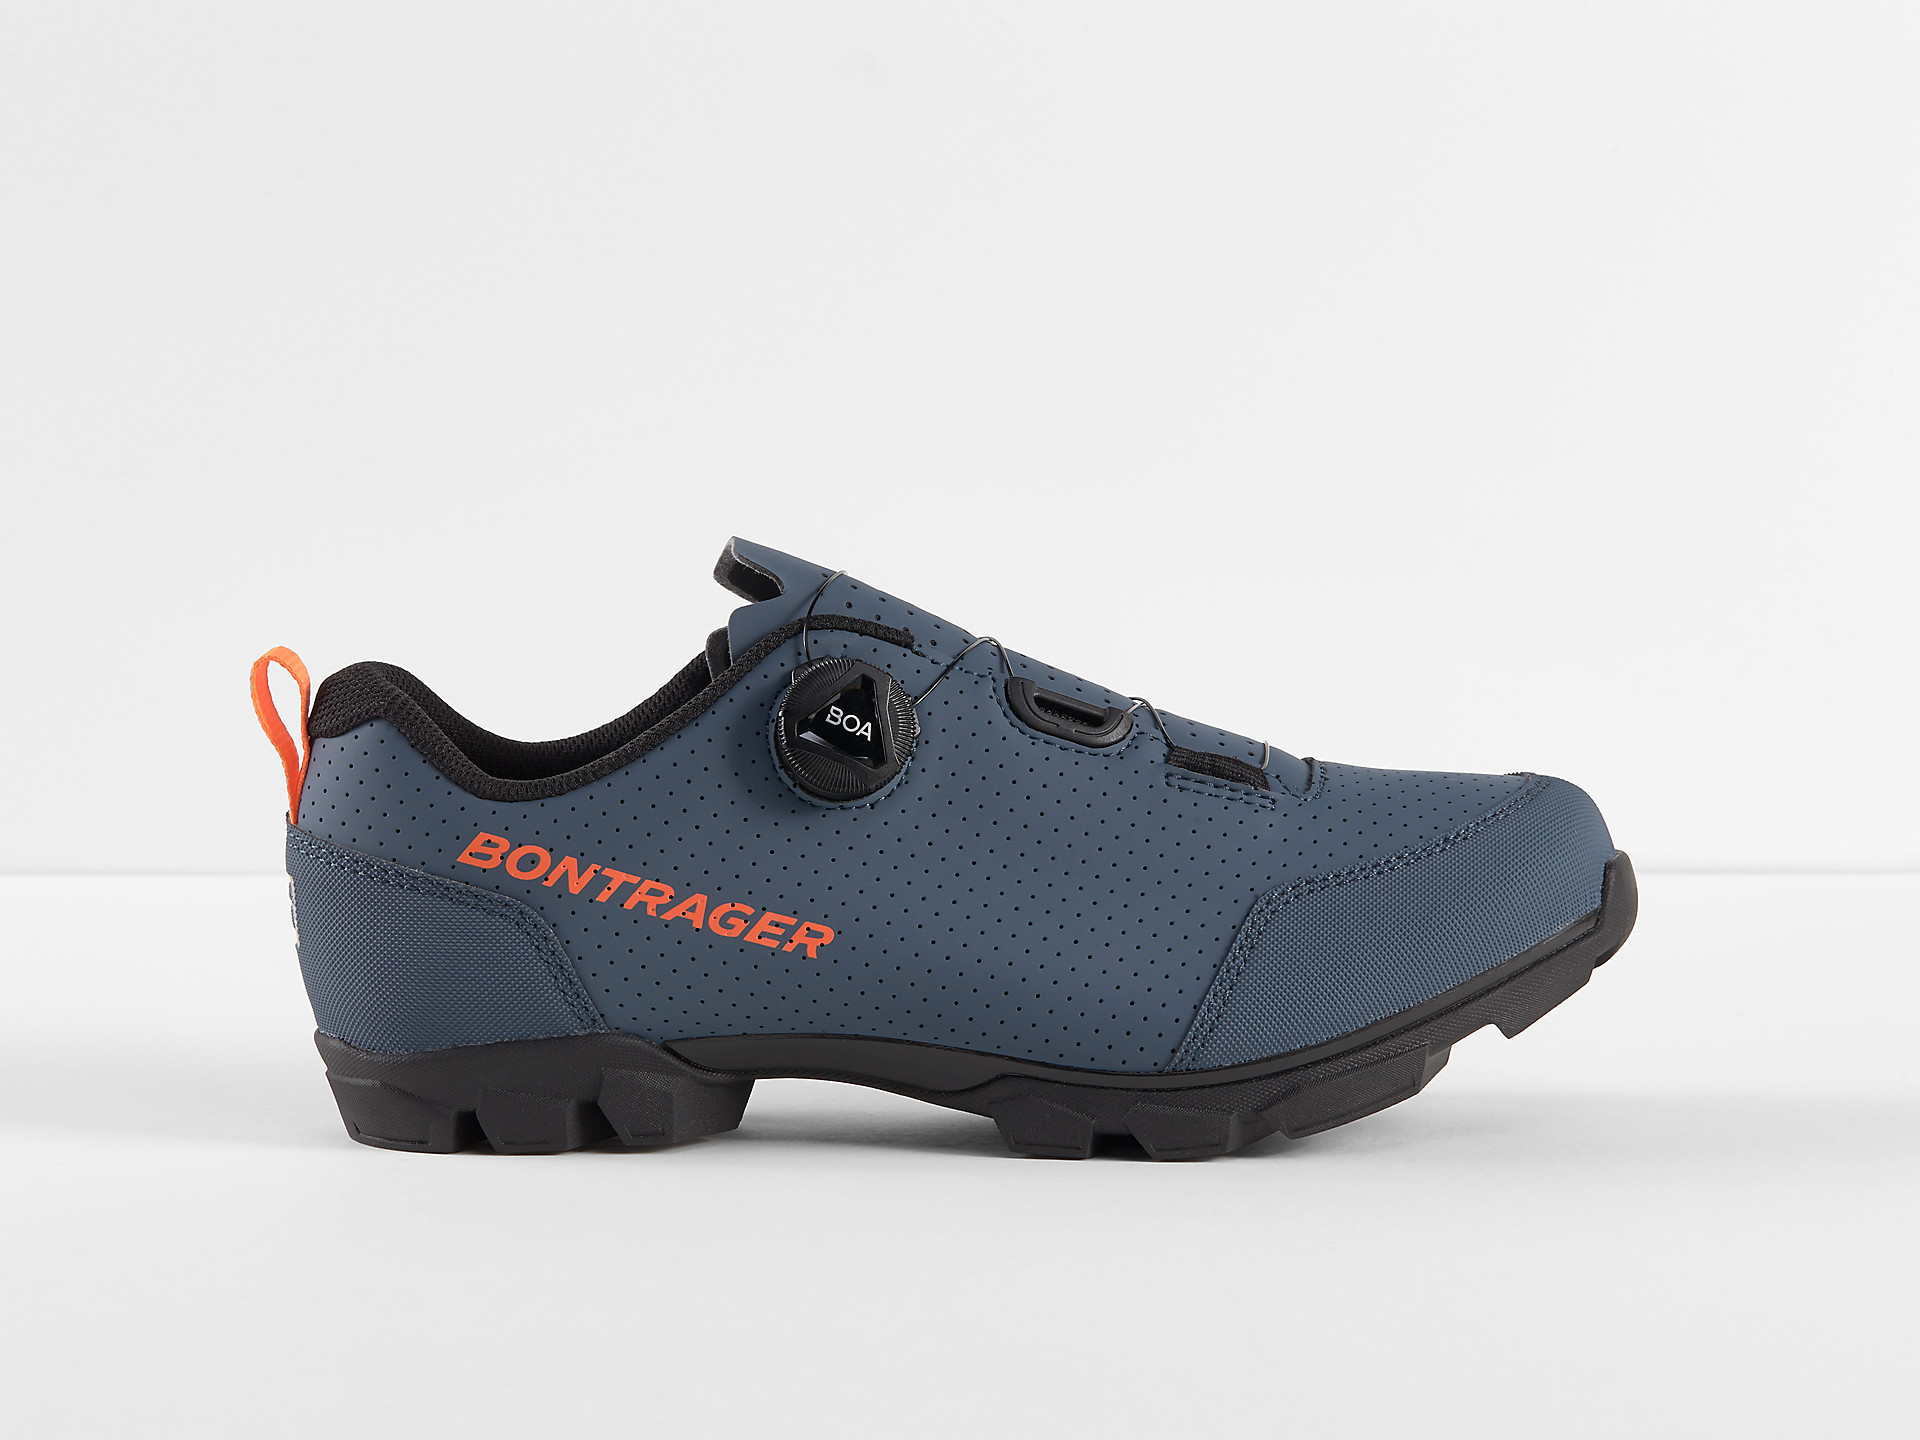 <a href="https://cycles-clement.be/product/bont-chaussures-evoke-43-black/">BONT CHAUSSURES EVOKE 43 BLACK</a>